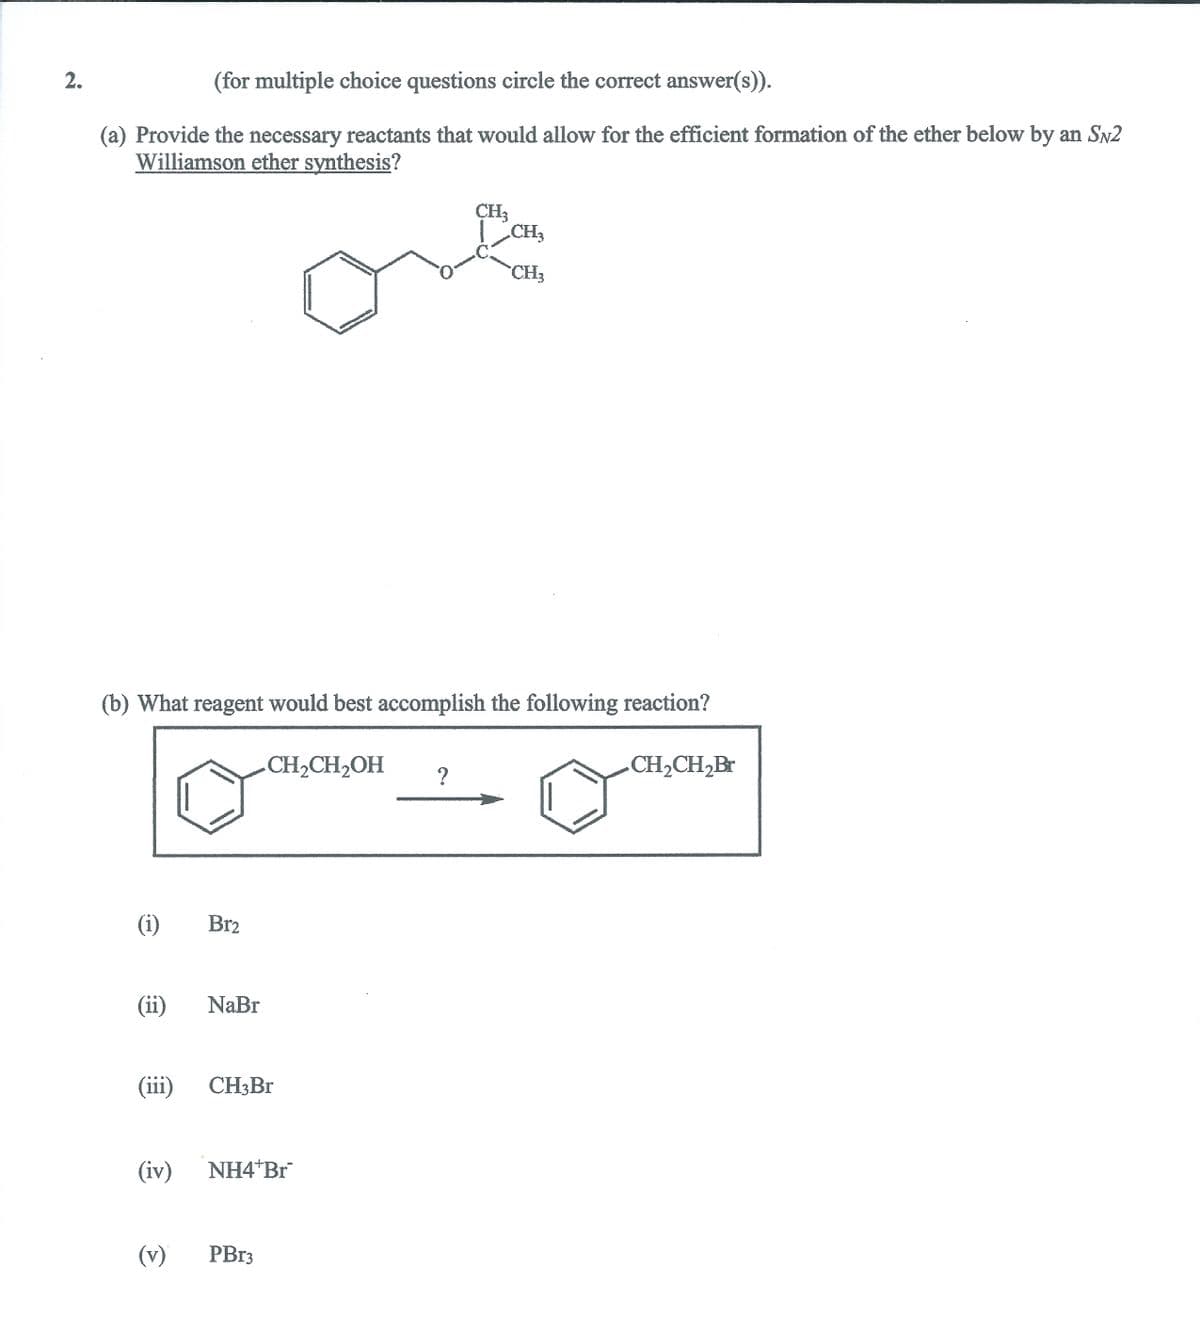 2.
(for multiple choice questions circle the correct answer(s)).
(a) Provide the necessary reactants that would allow for the efficient formation of the ether below by an SN2
Williamson ether synthesis?
CH3
CH3
CH3
(b) What reagent would best accomplish the following reaction?
CH2CH2OH
CH2CH,Br
(i)
Br2
(ii)
NaBr
(iii)
CH3BR
(iv)
NH4 Br
(v)
PB13
